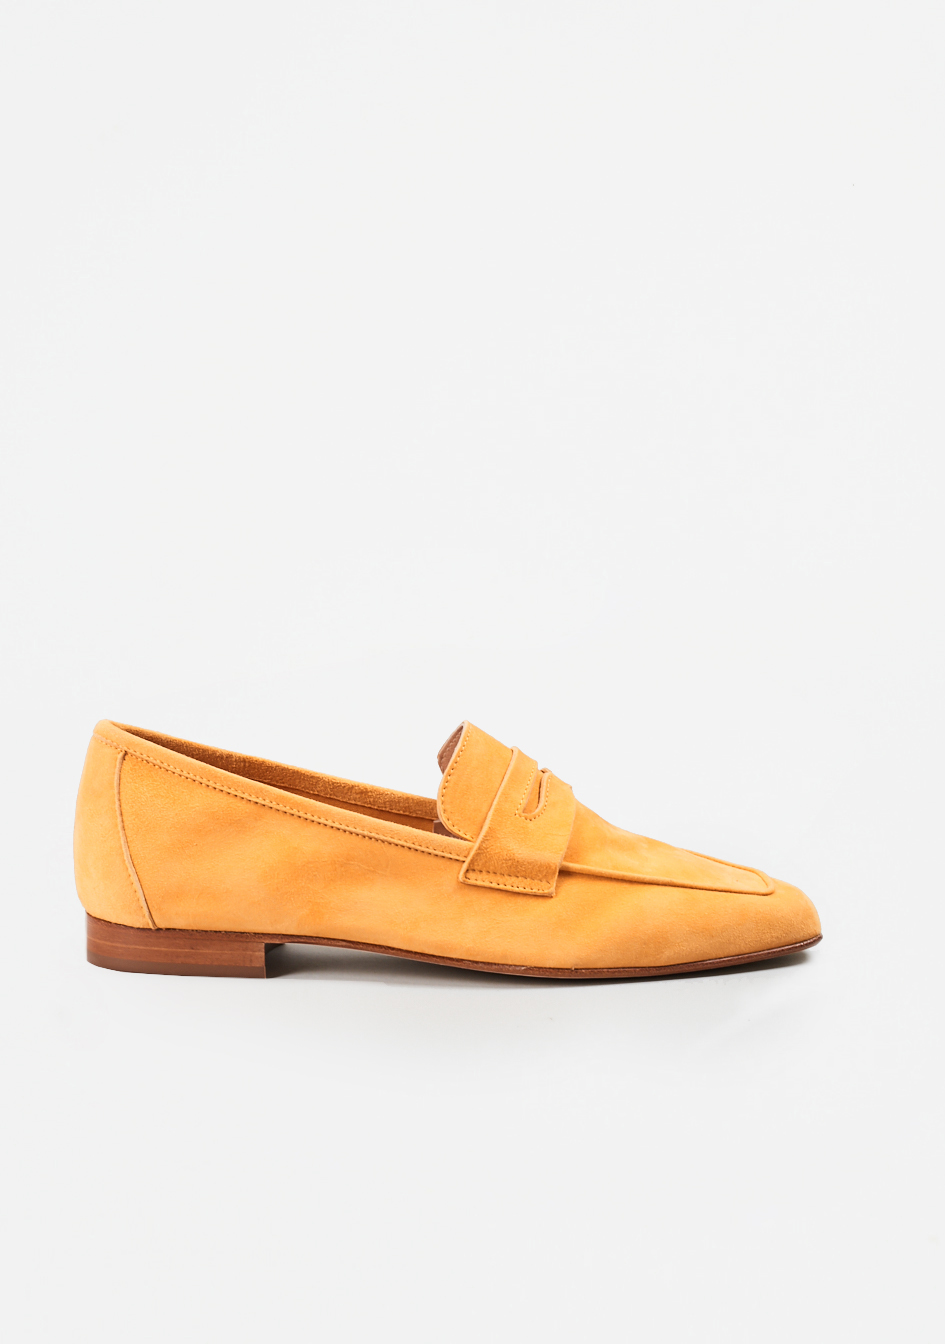 dressing loafers